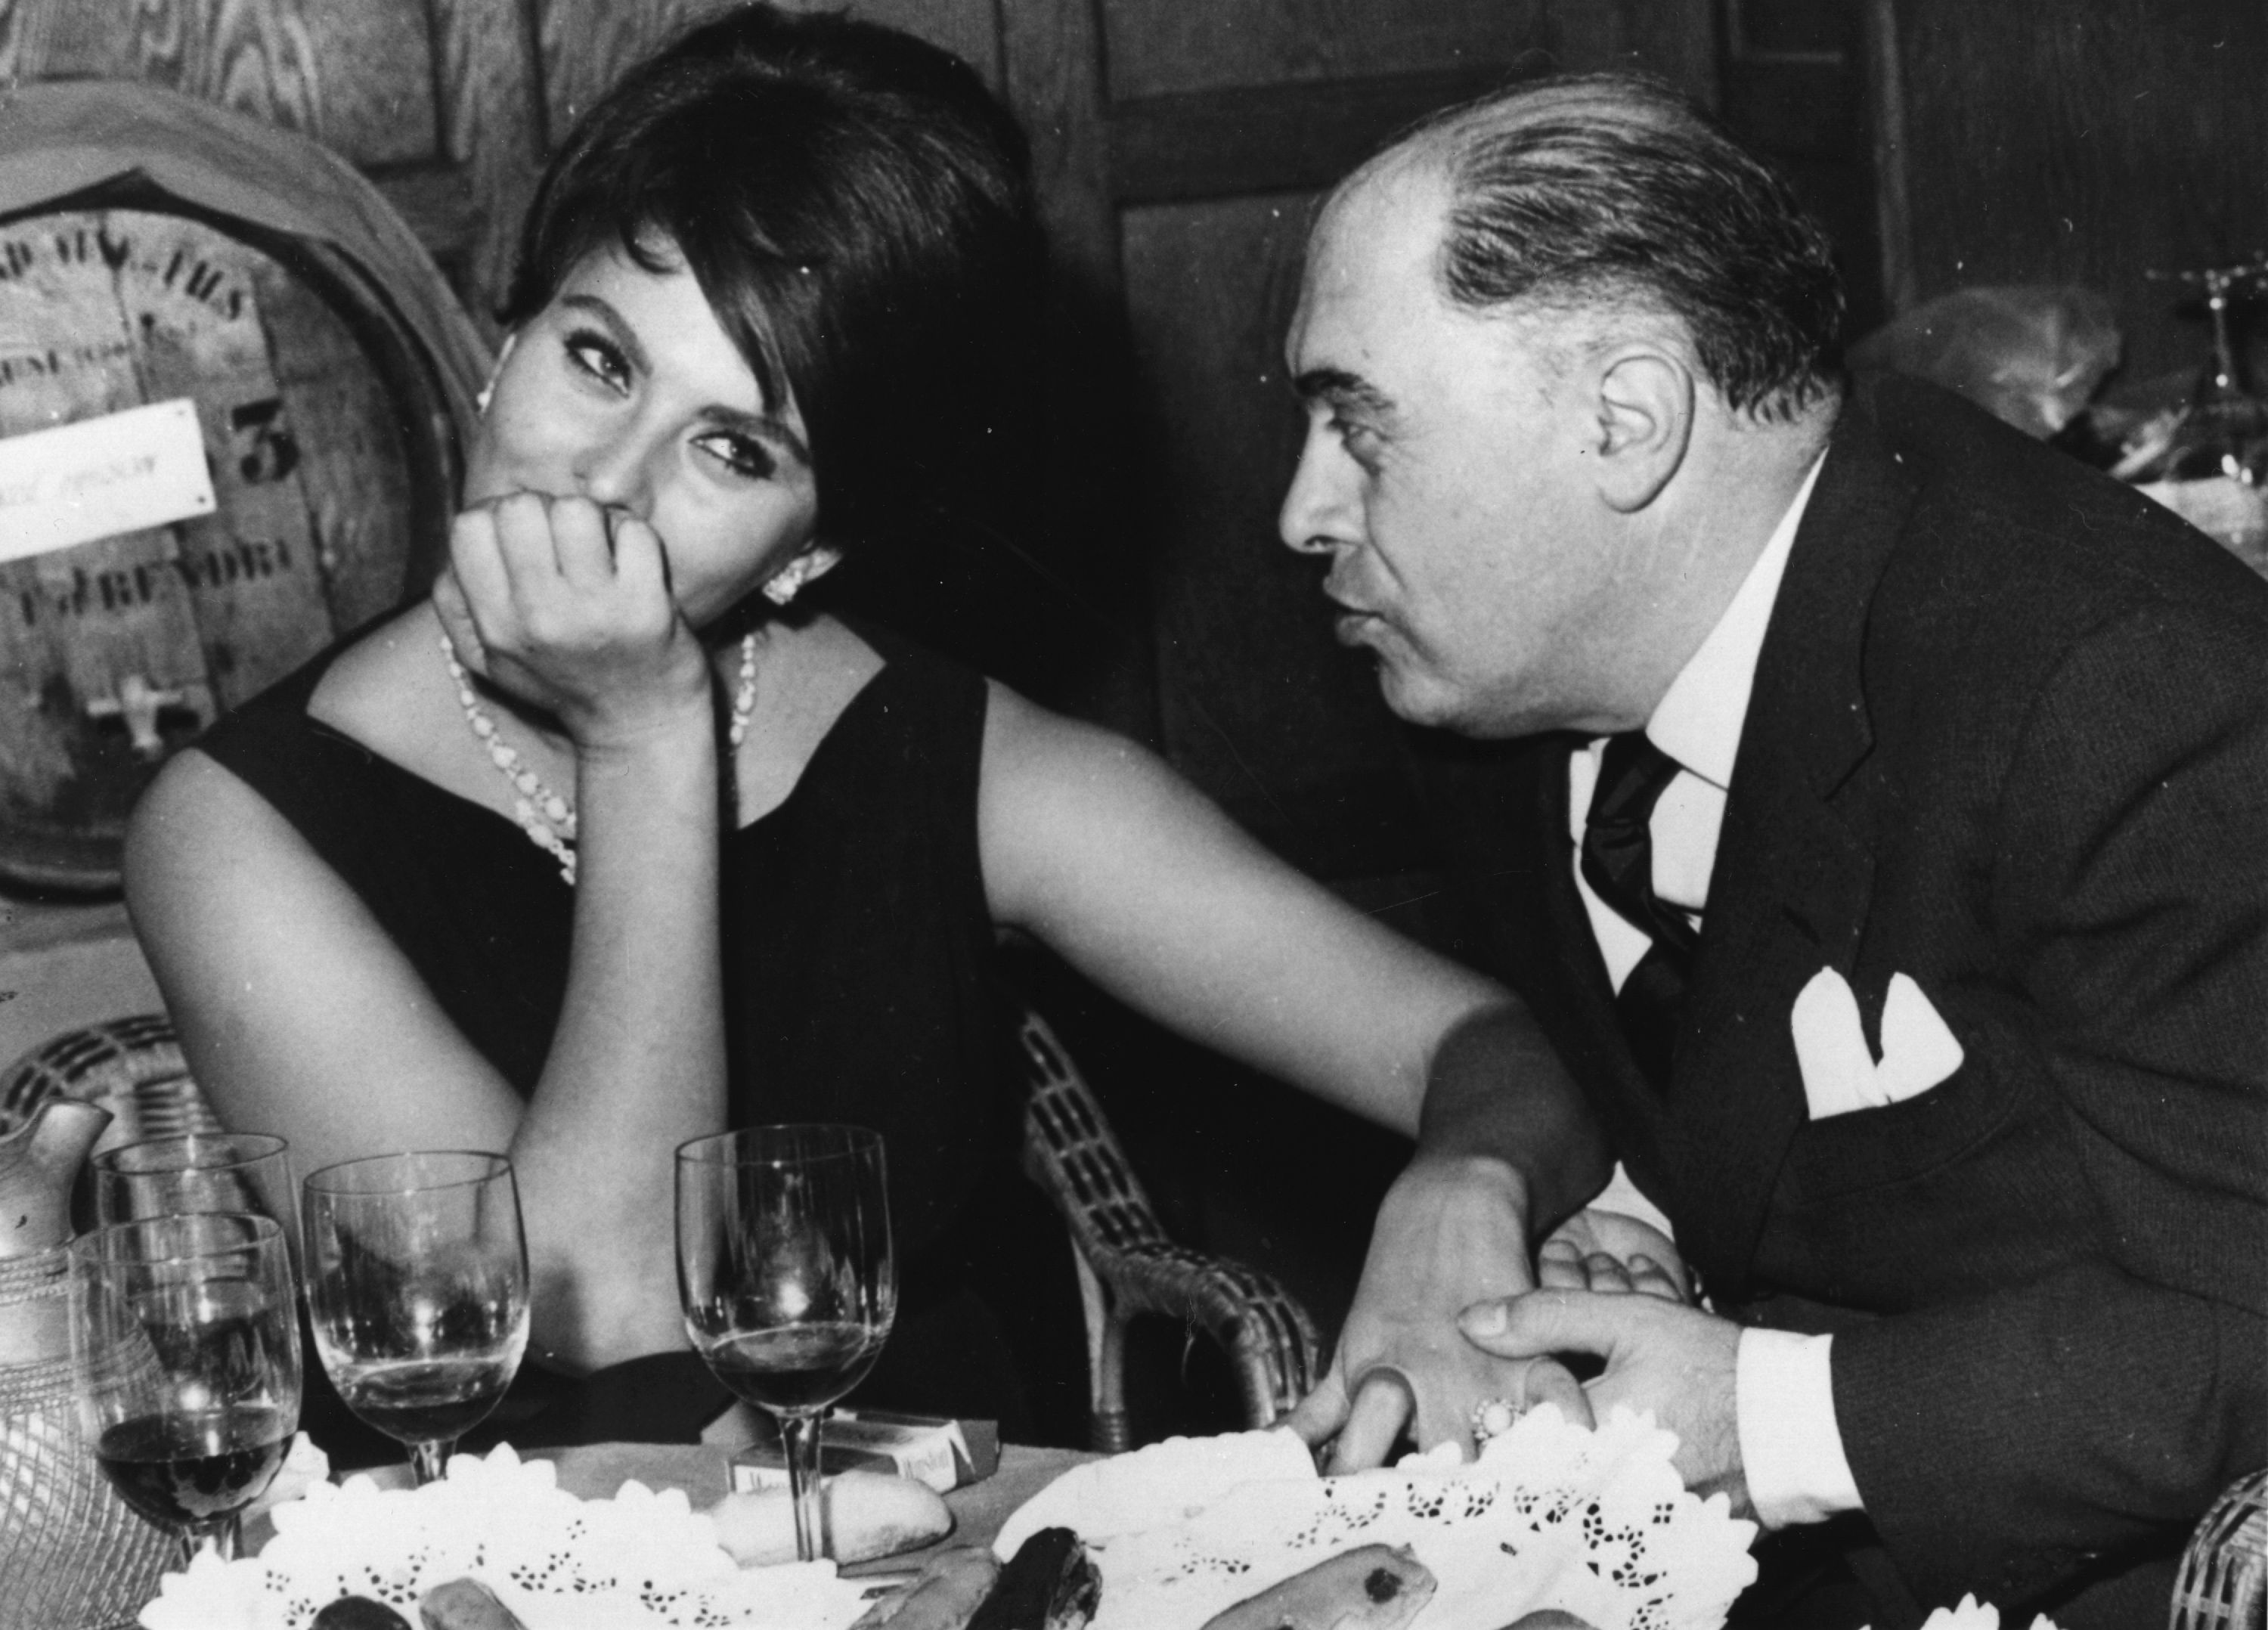 Sophila Loren and Carlo Ponti pictured in a restaurant on January 1, 1965 in France | Source: Getty Images